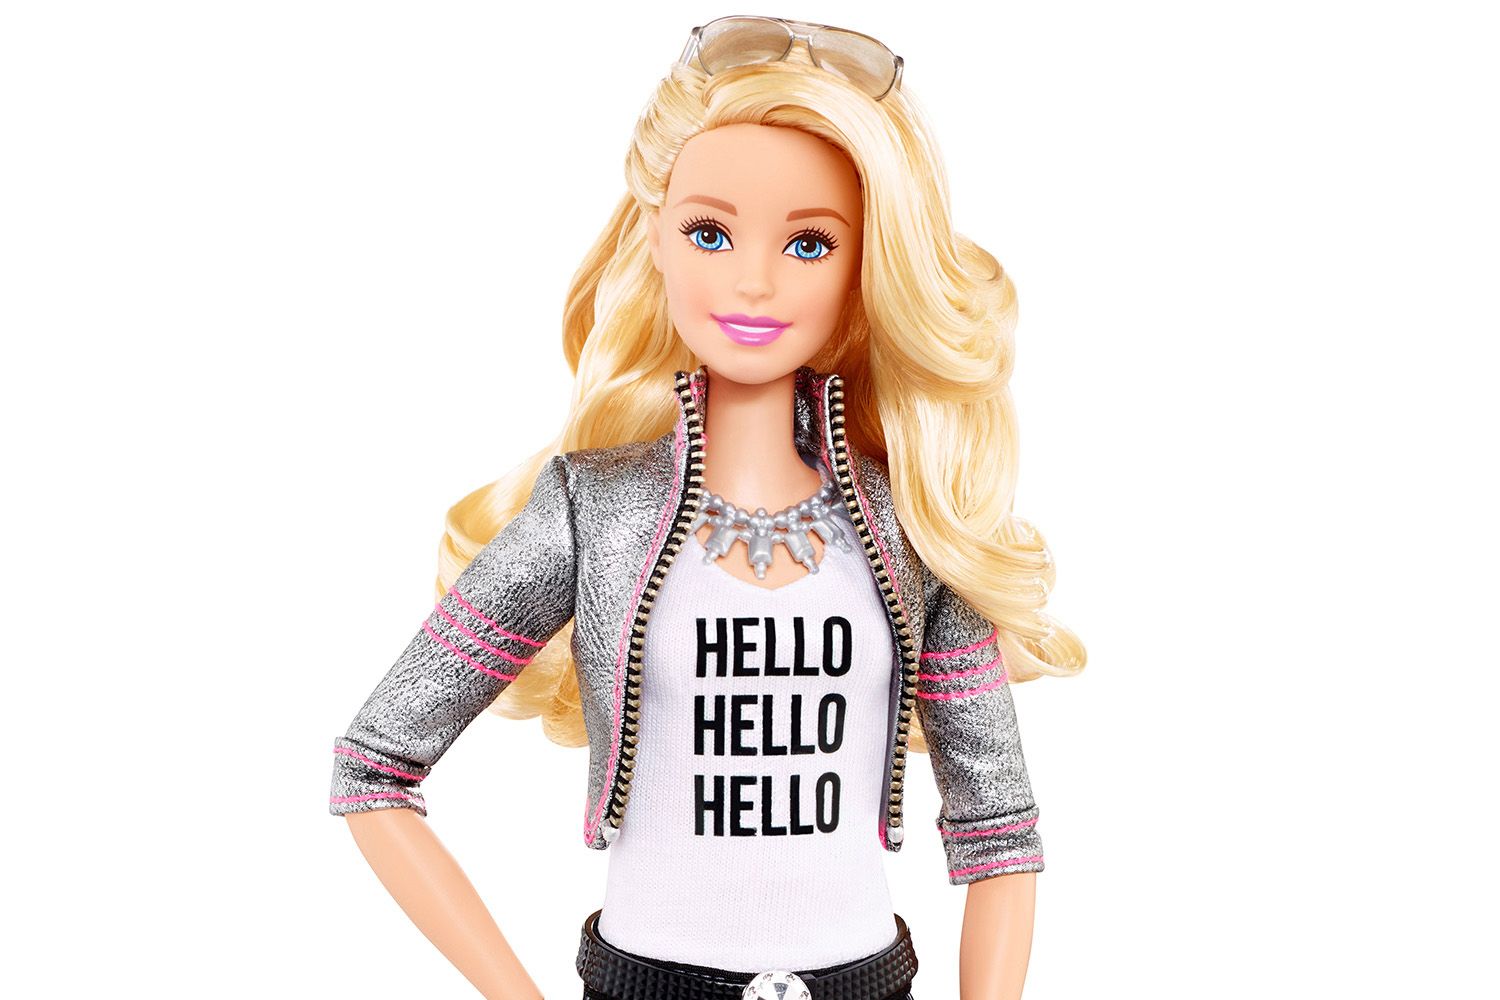 internet connected barbie will talk to your kids and learn from their responses image 1